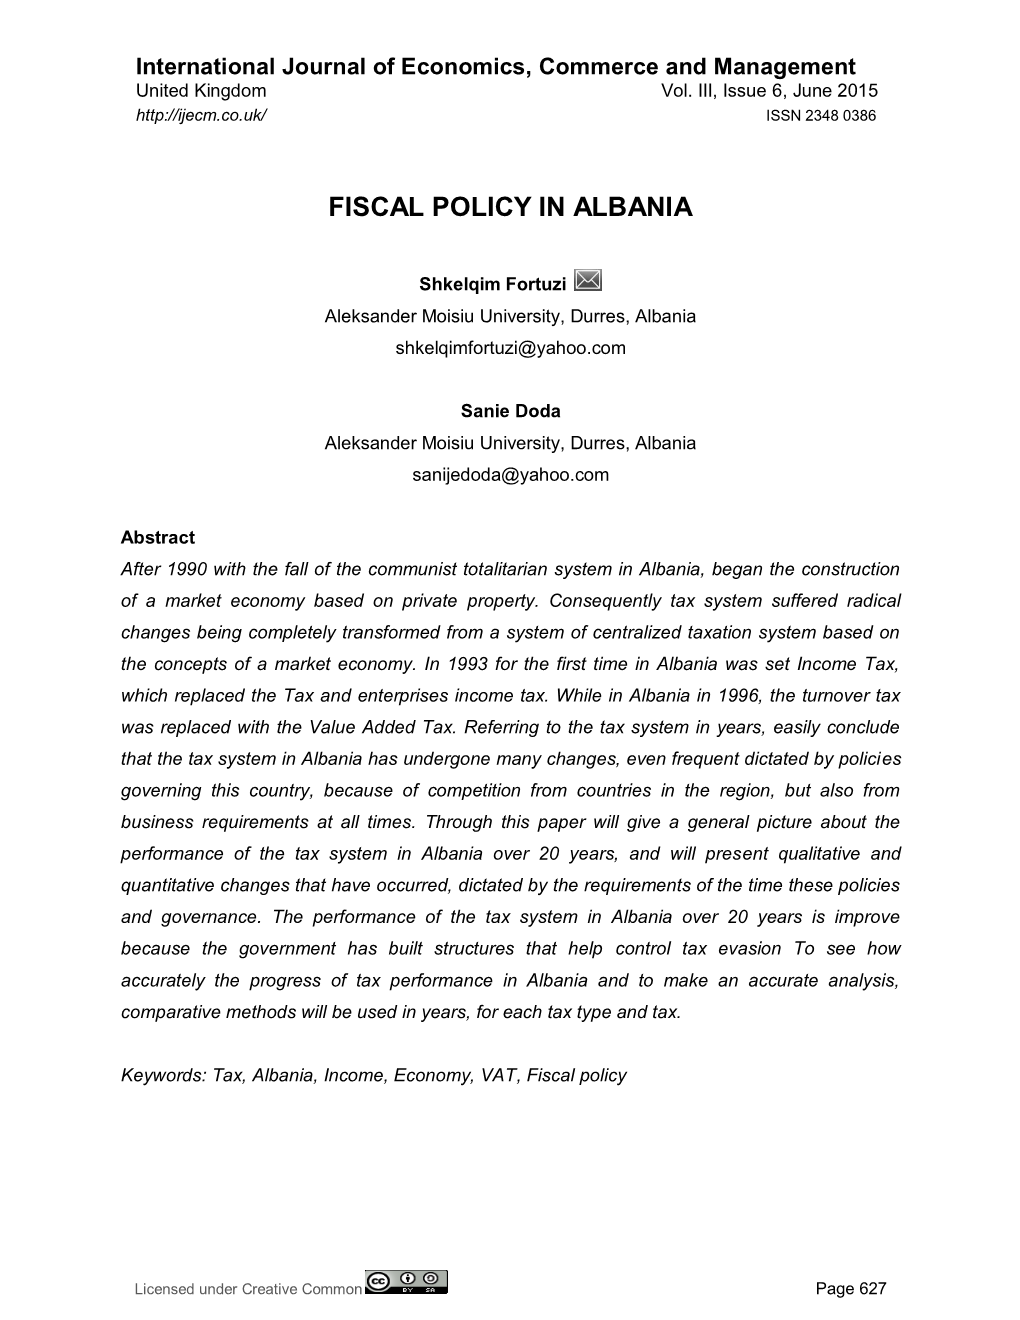 Fiscal Policy in Albania